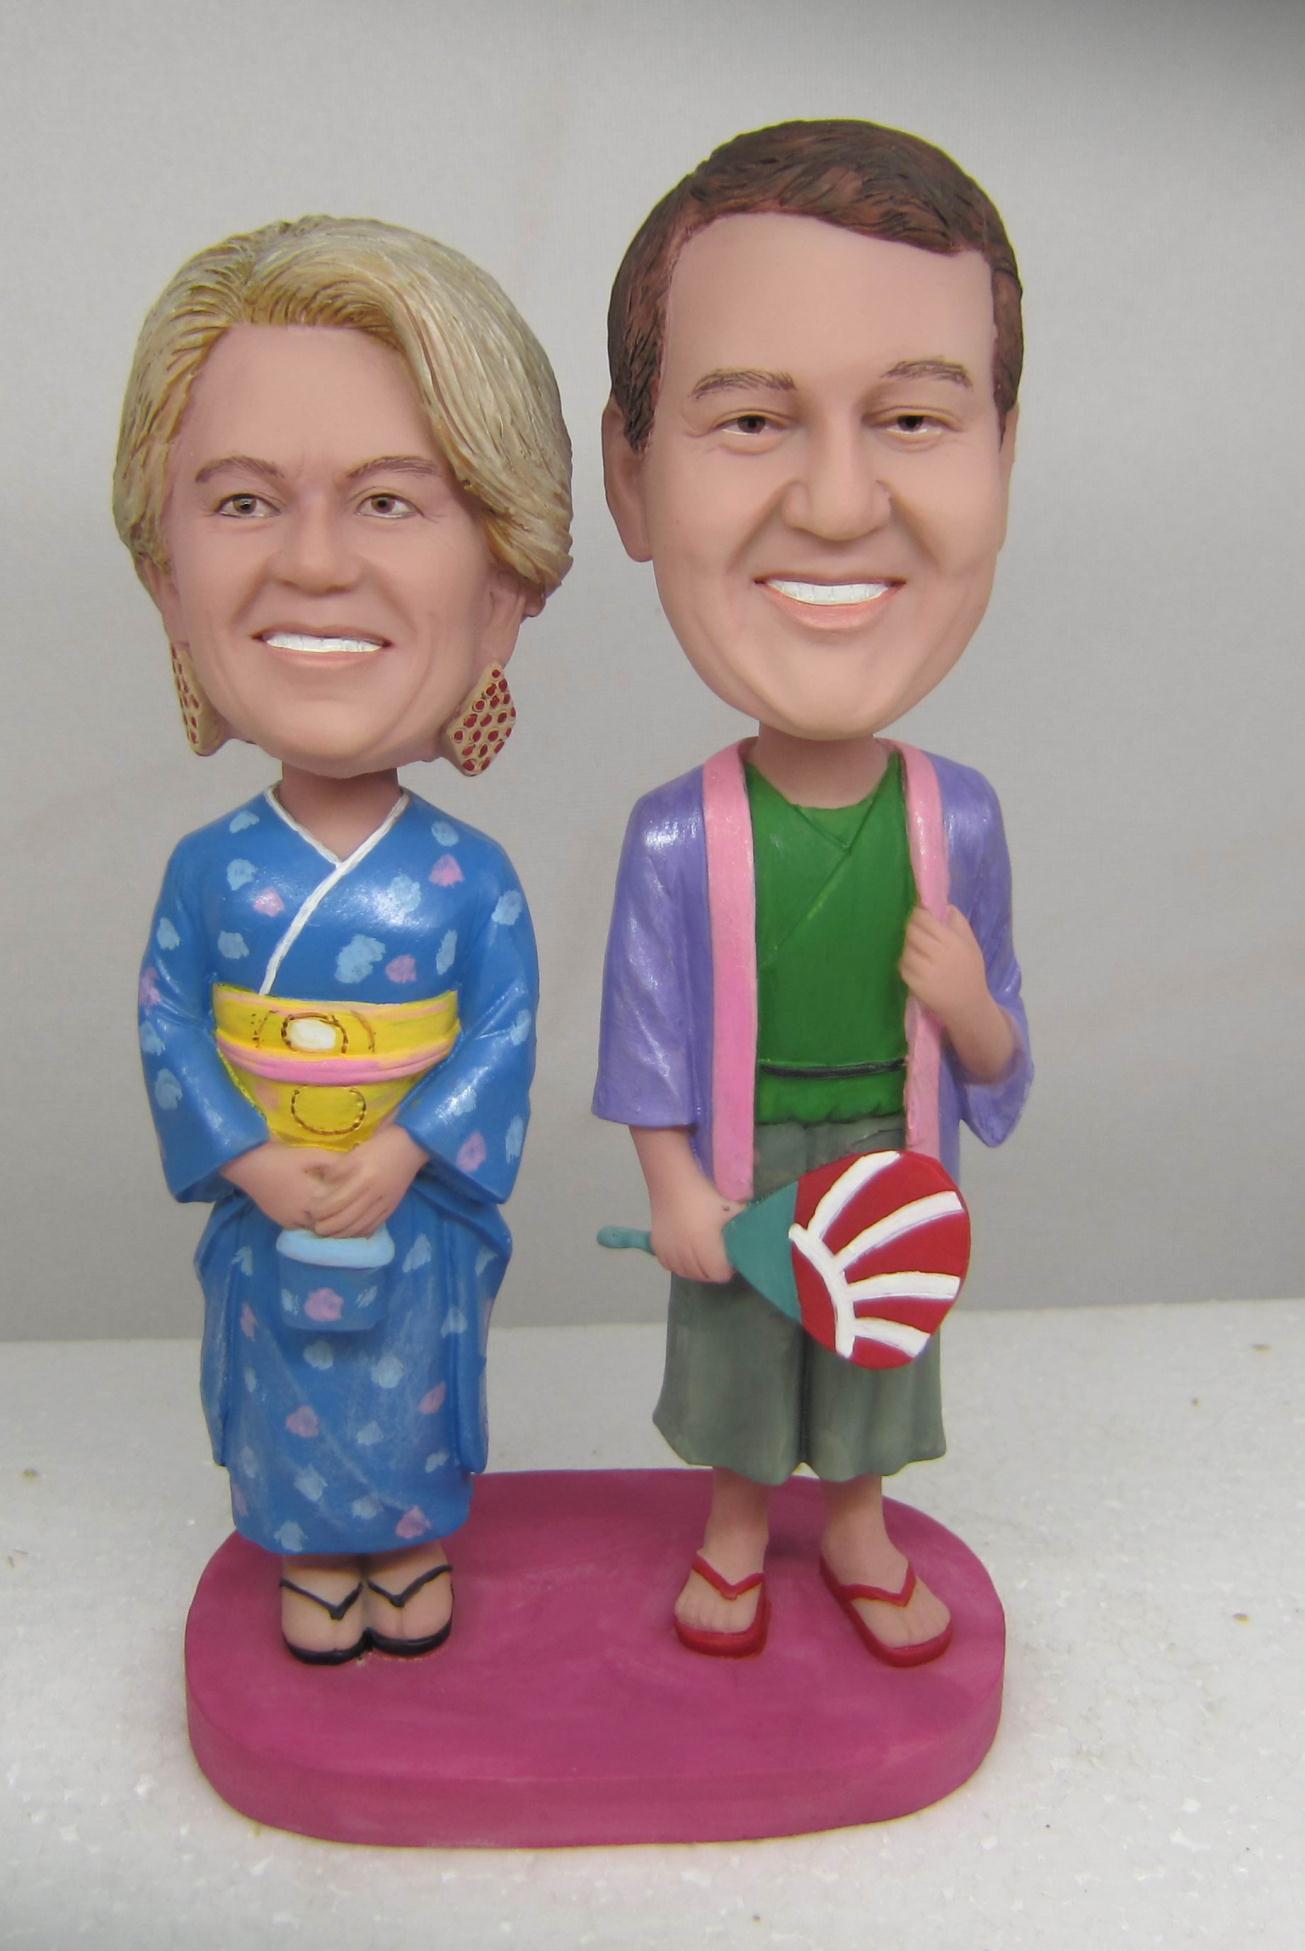 Custom Made Bobbleheads That Look Like You is a very interesting doll, you can have your own custom doll according to your preferences.